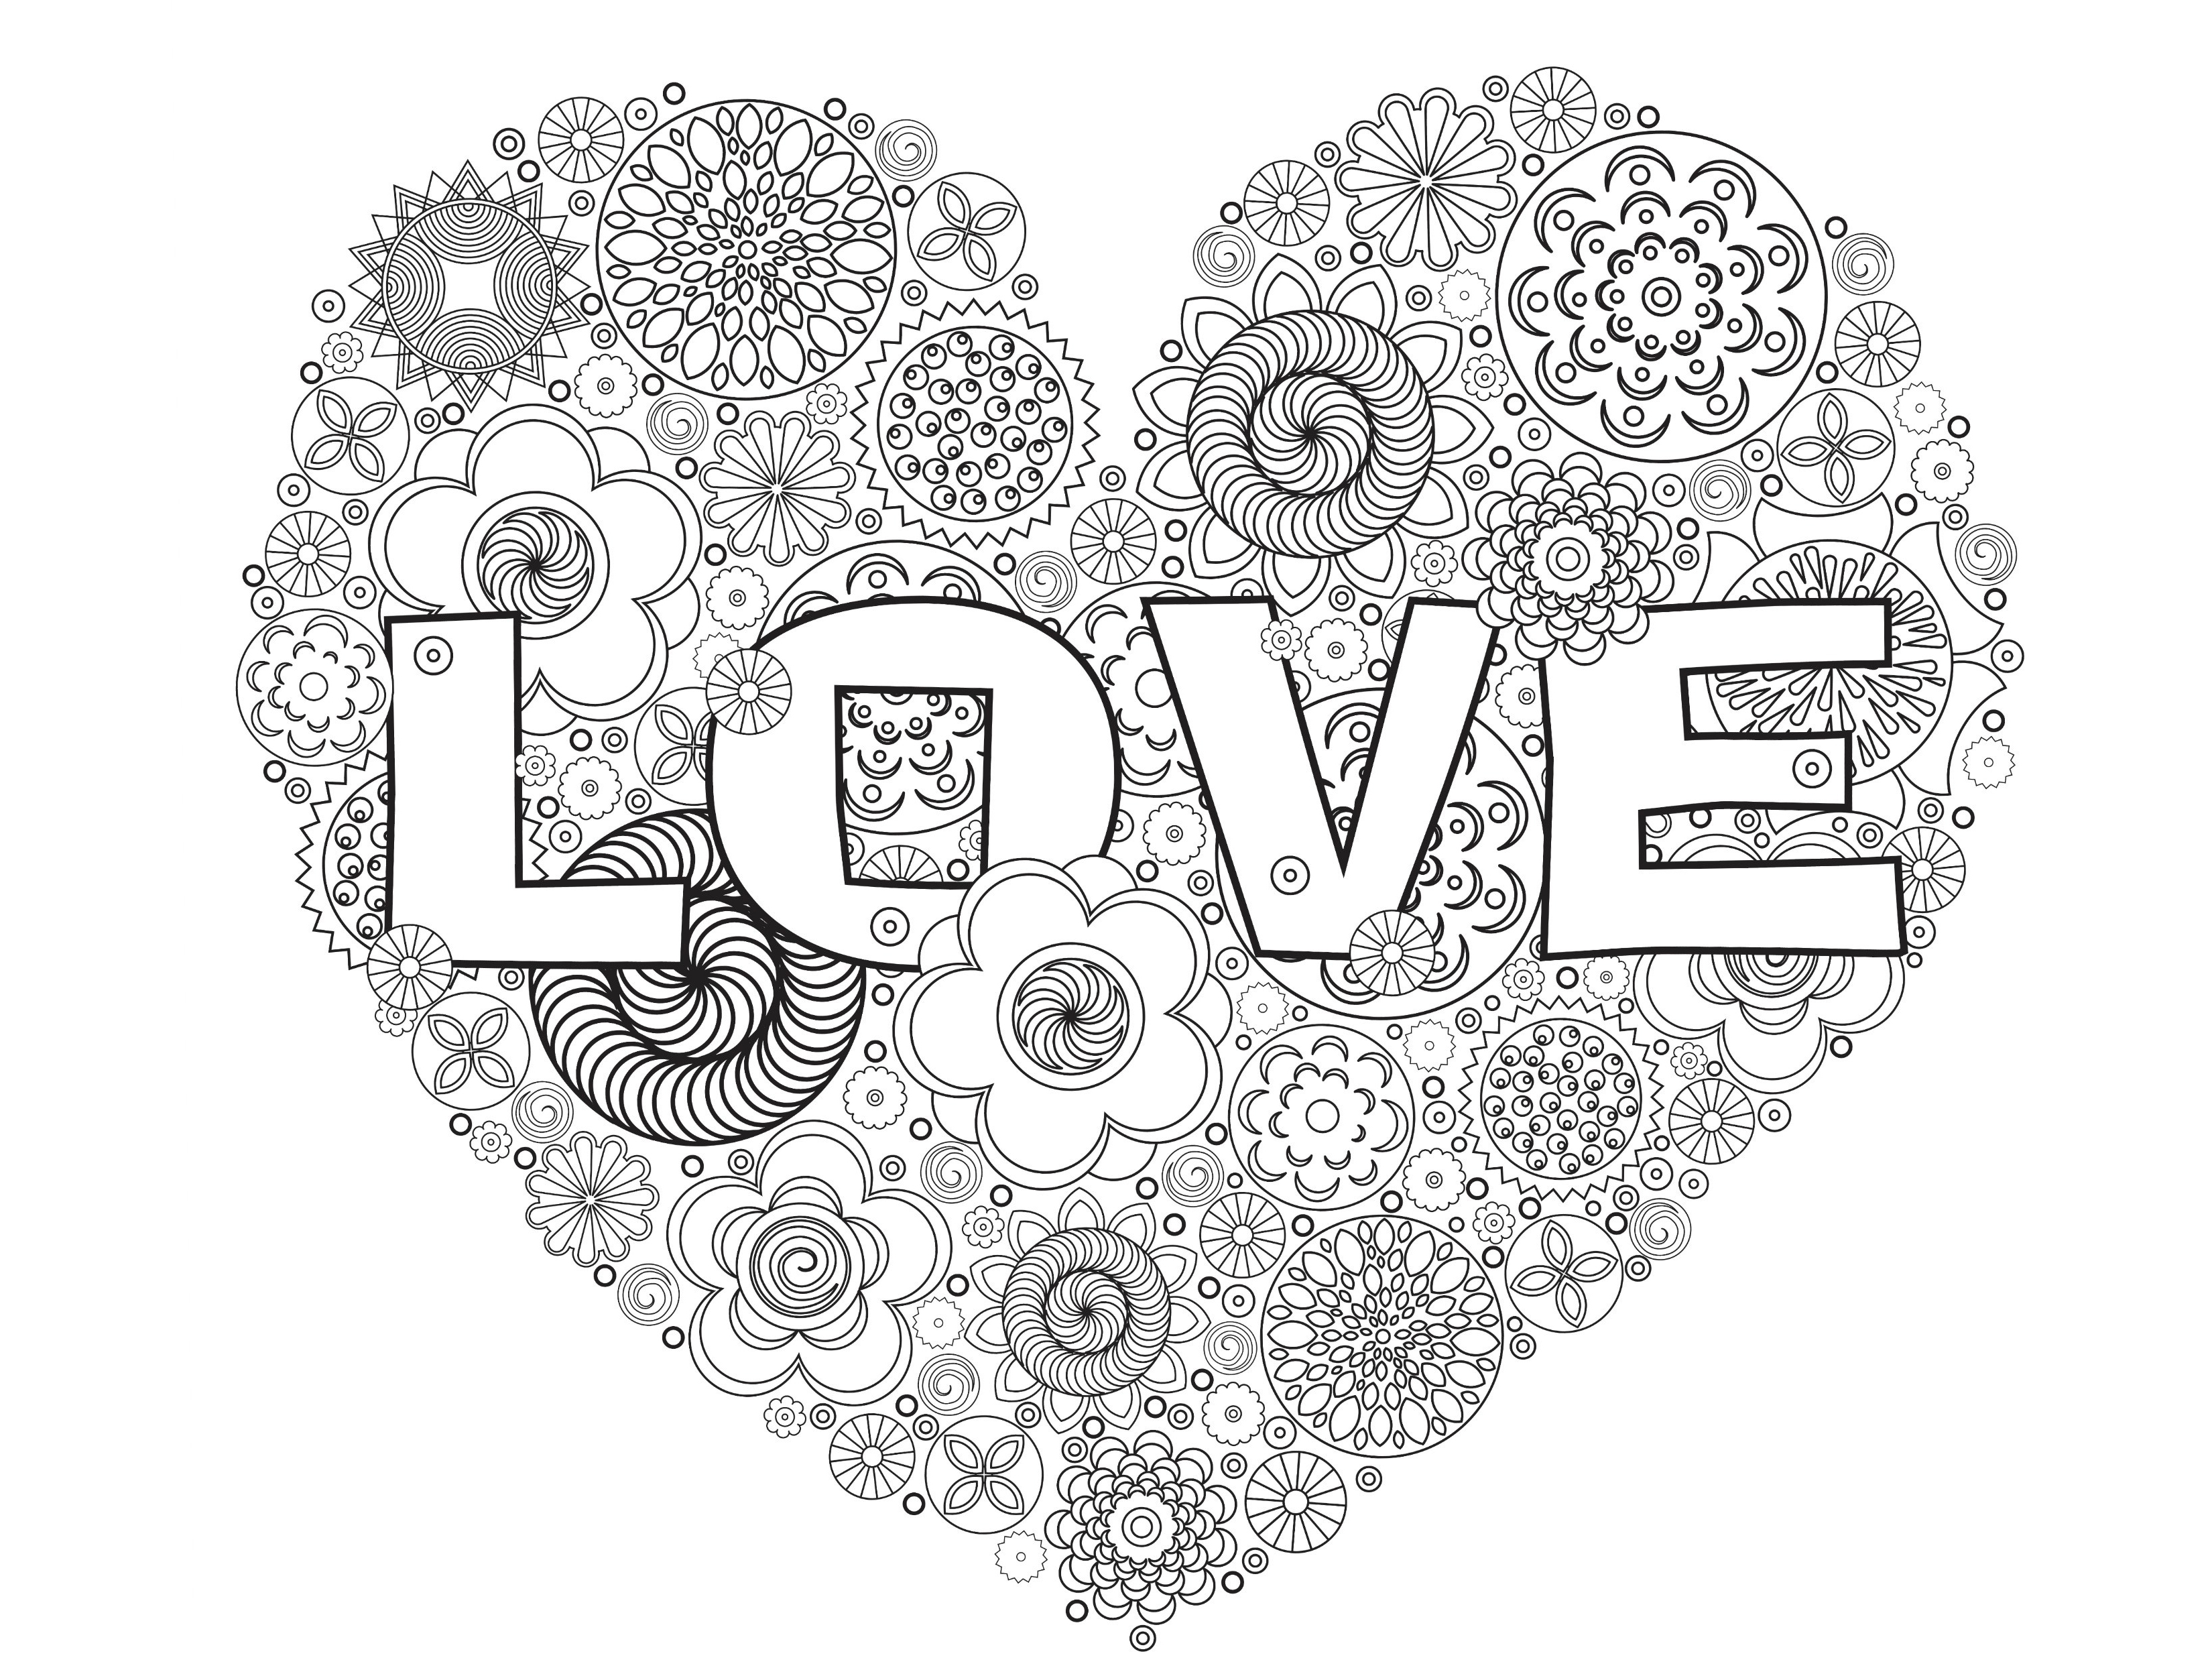 Valentines Day Coloring Pages for Adults - Best Coloring ...